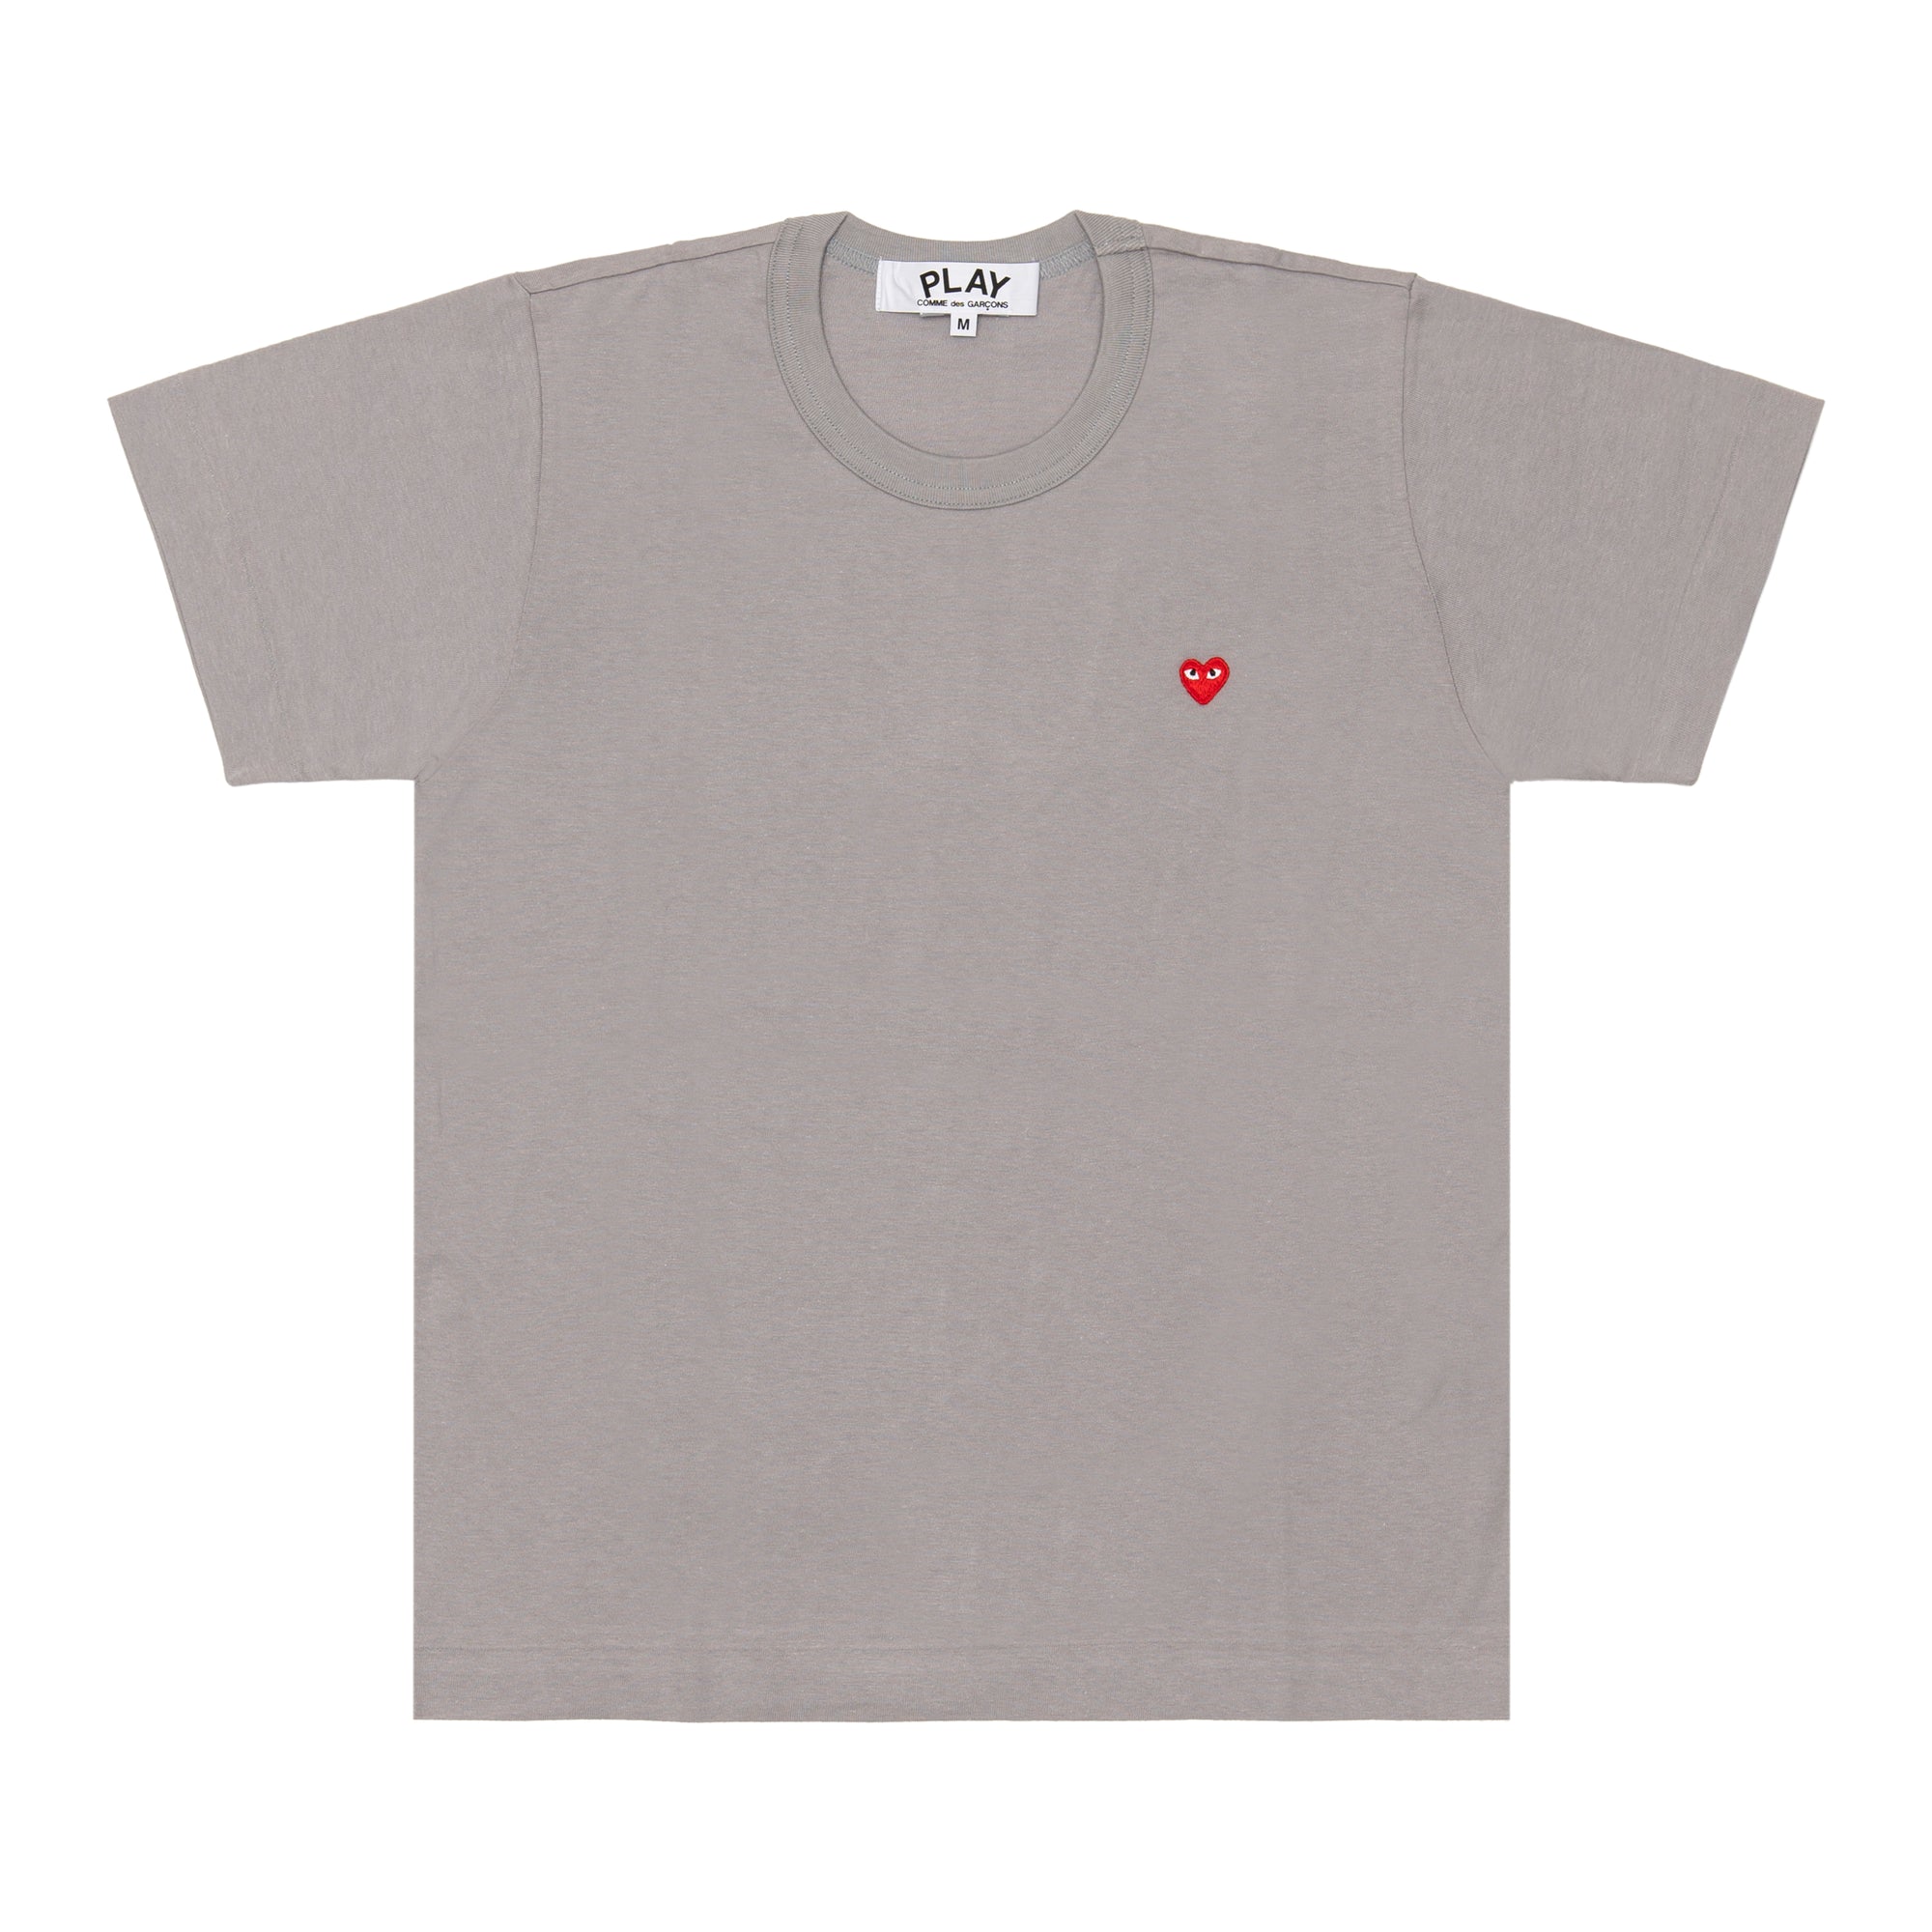 PLAY CDG - Small Red Heart S/S T-Shirt - (Gray) view 1